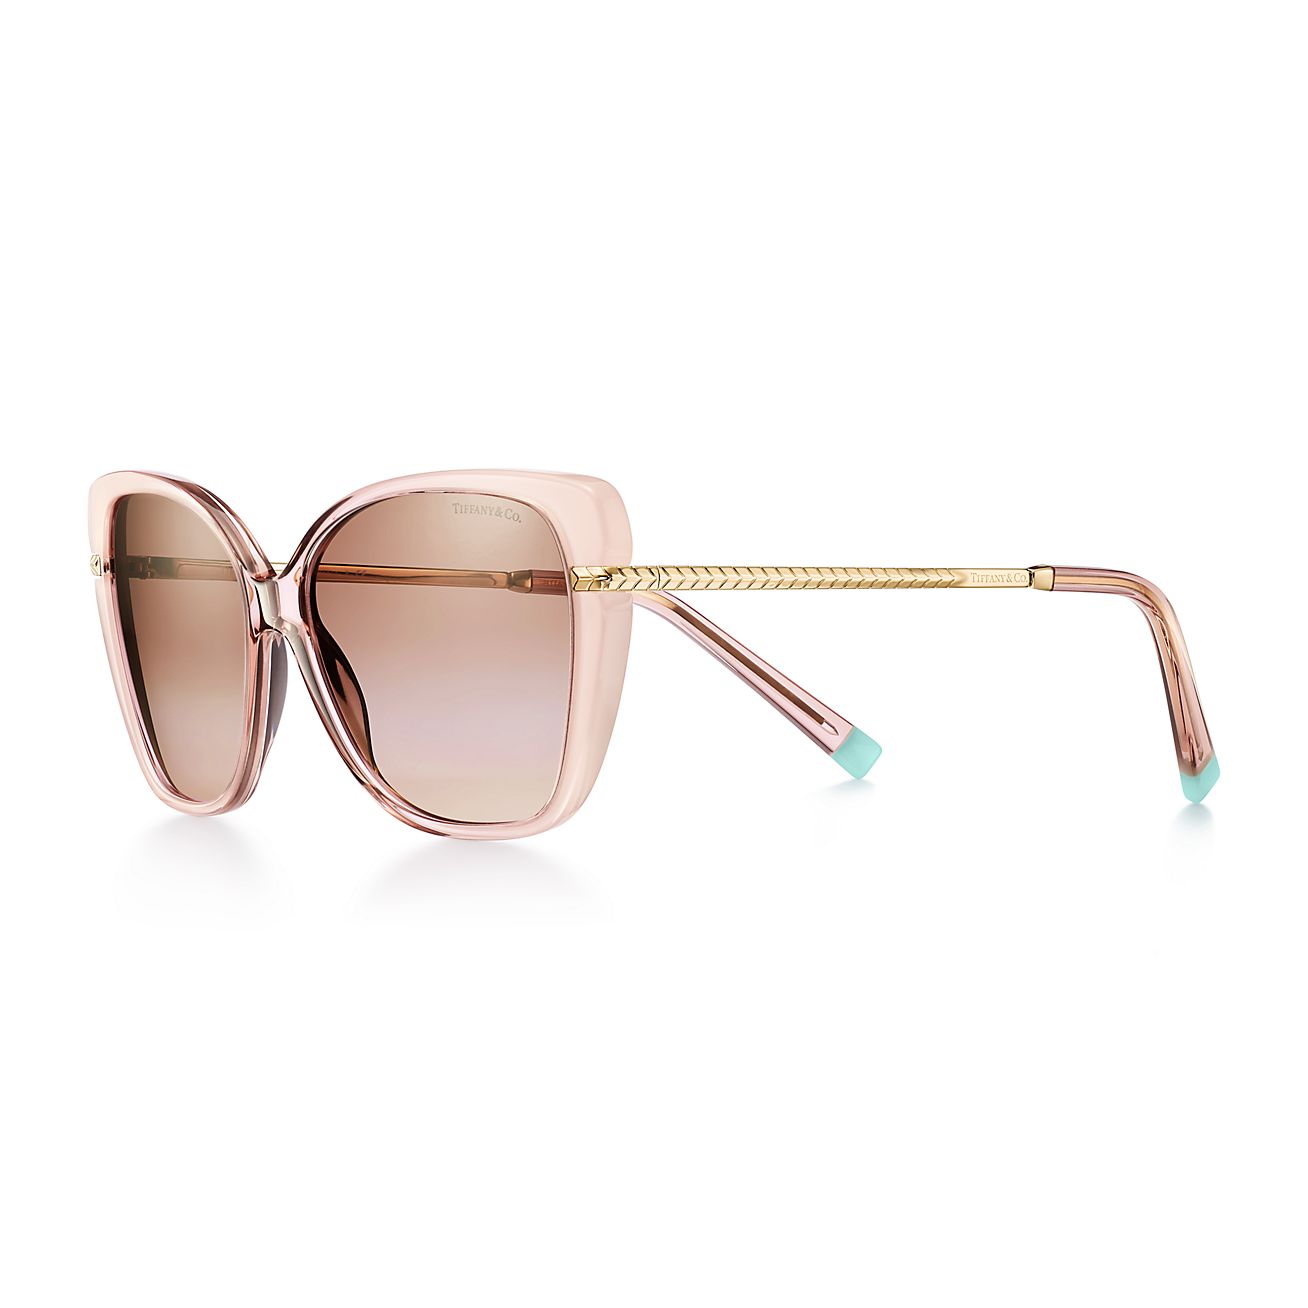 Wheat Leaf Cat Eye Sunglasses in Pink Acetate with Gradient Brown